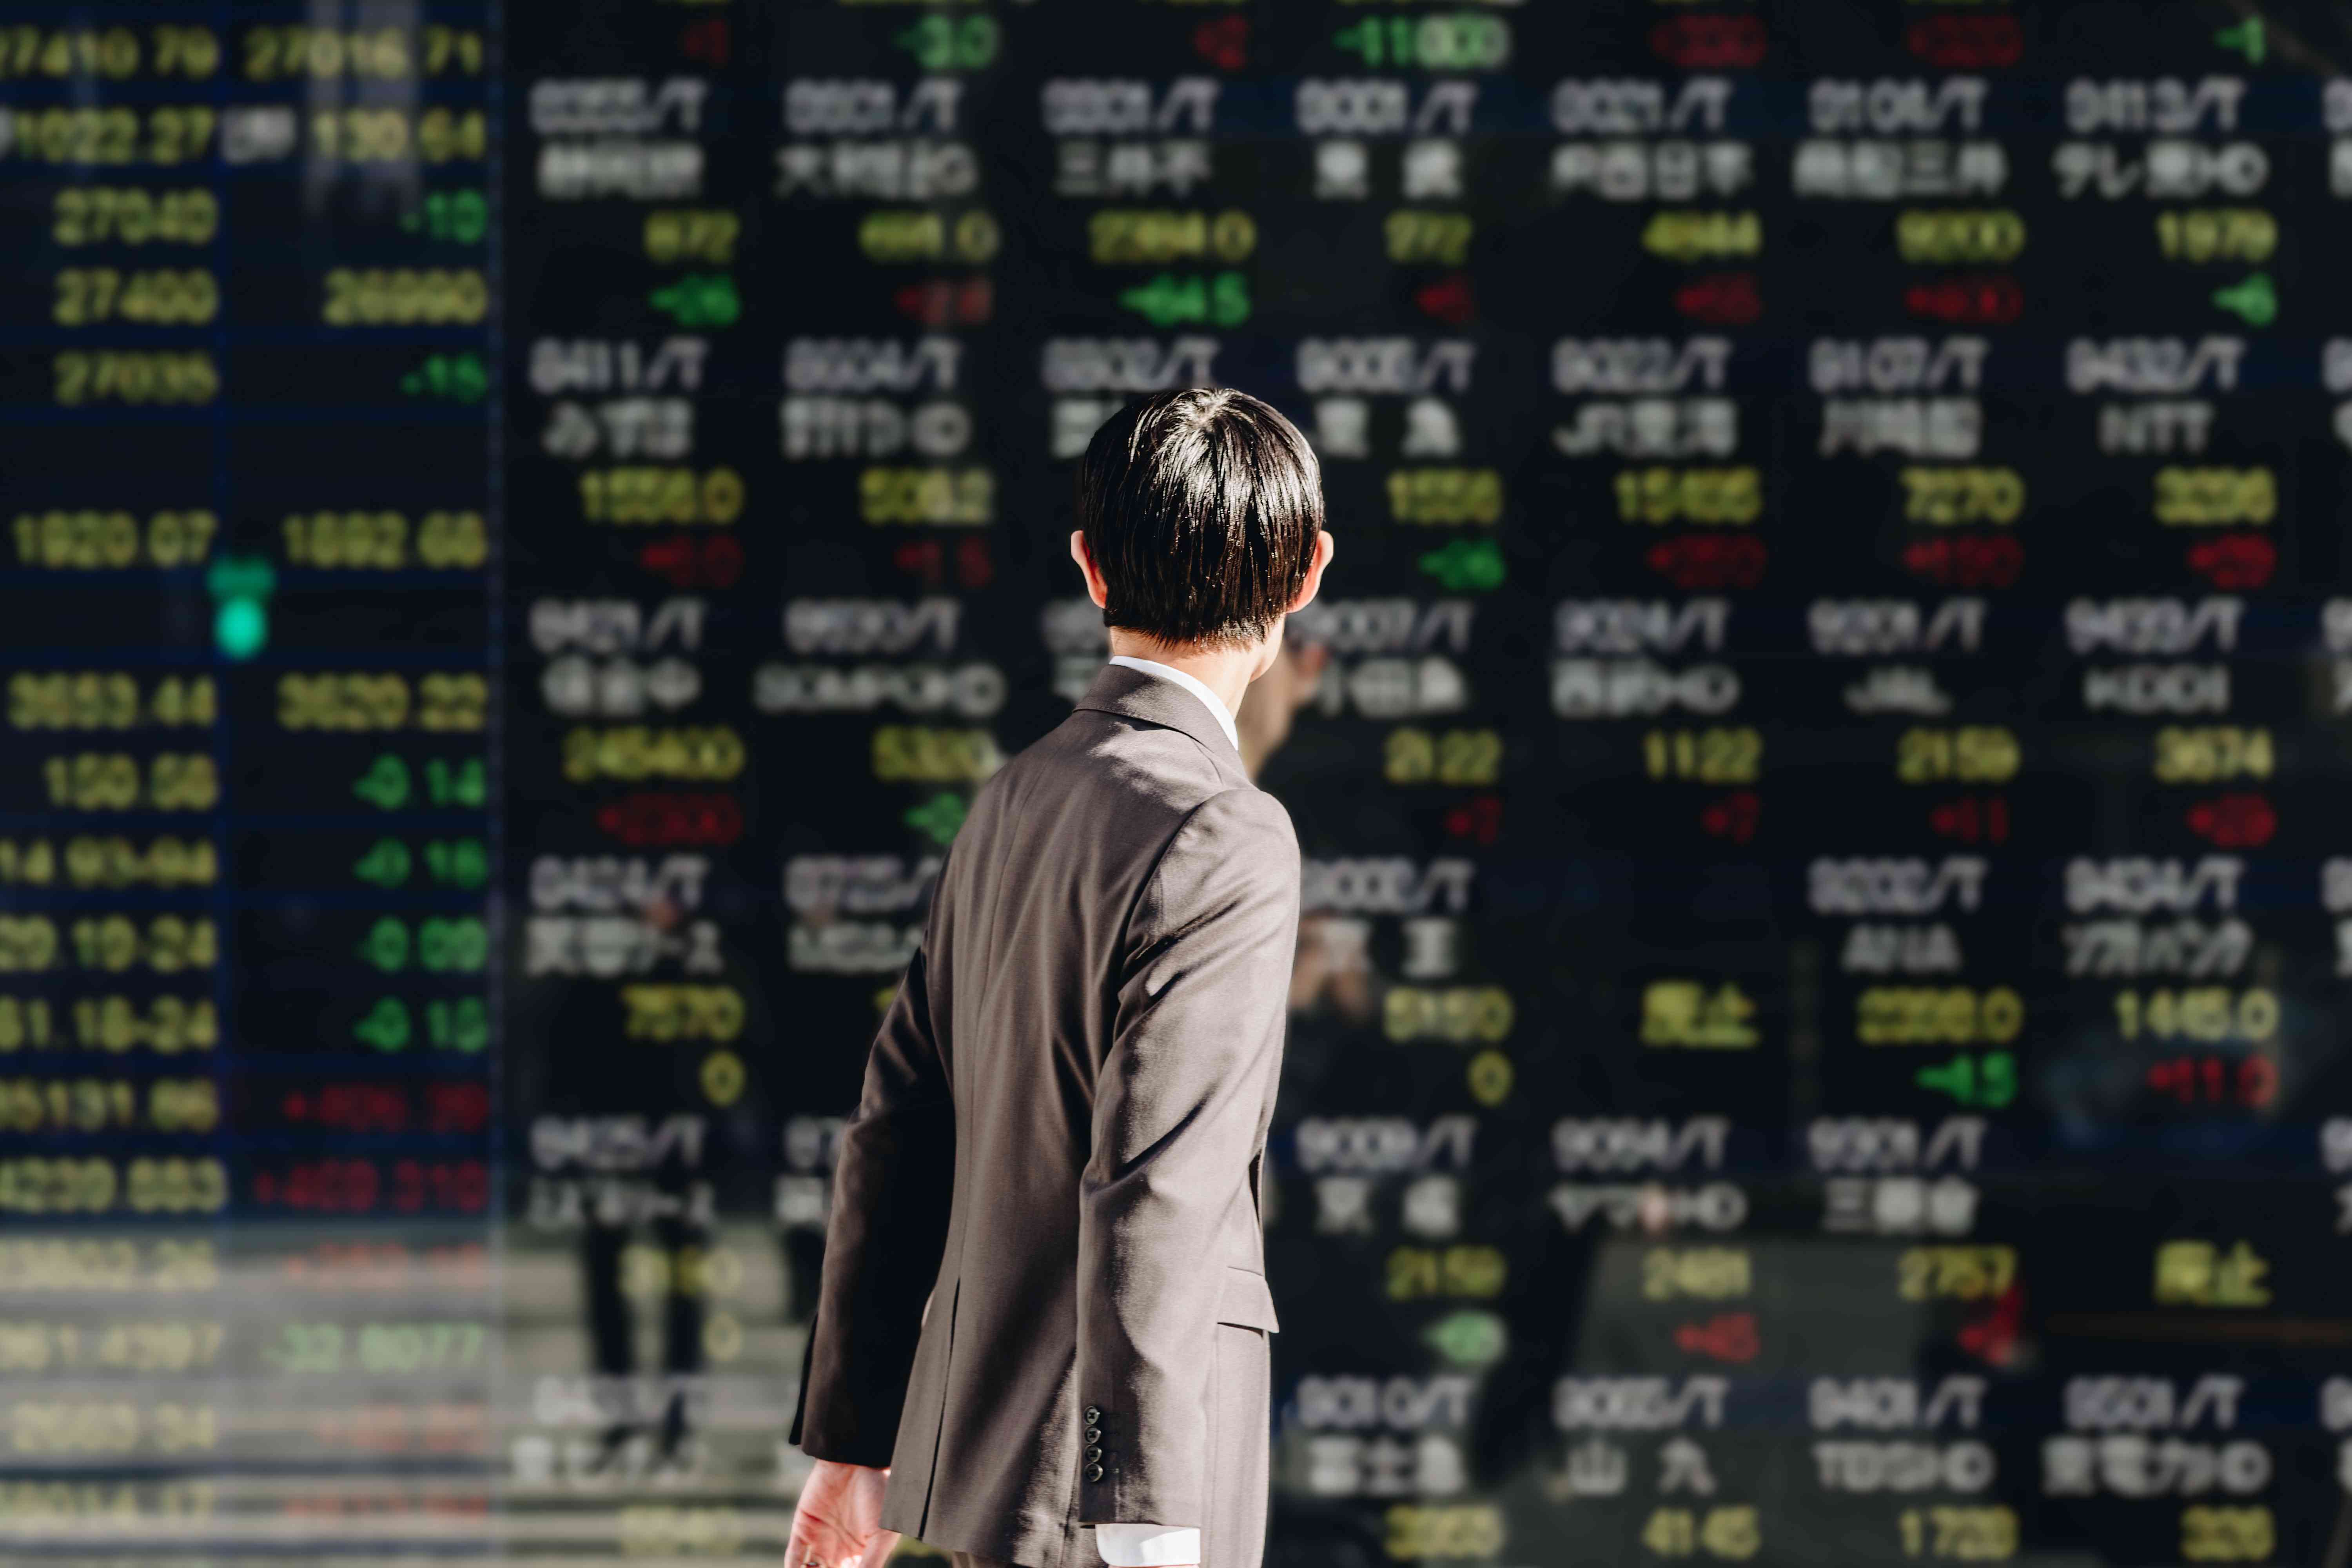 Person walking by a Japanese stock price board